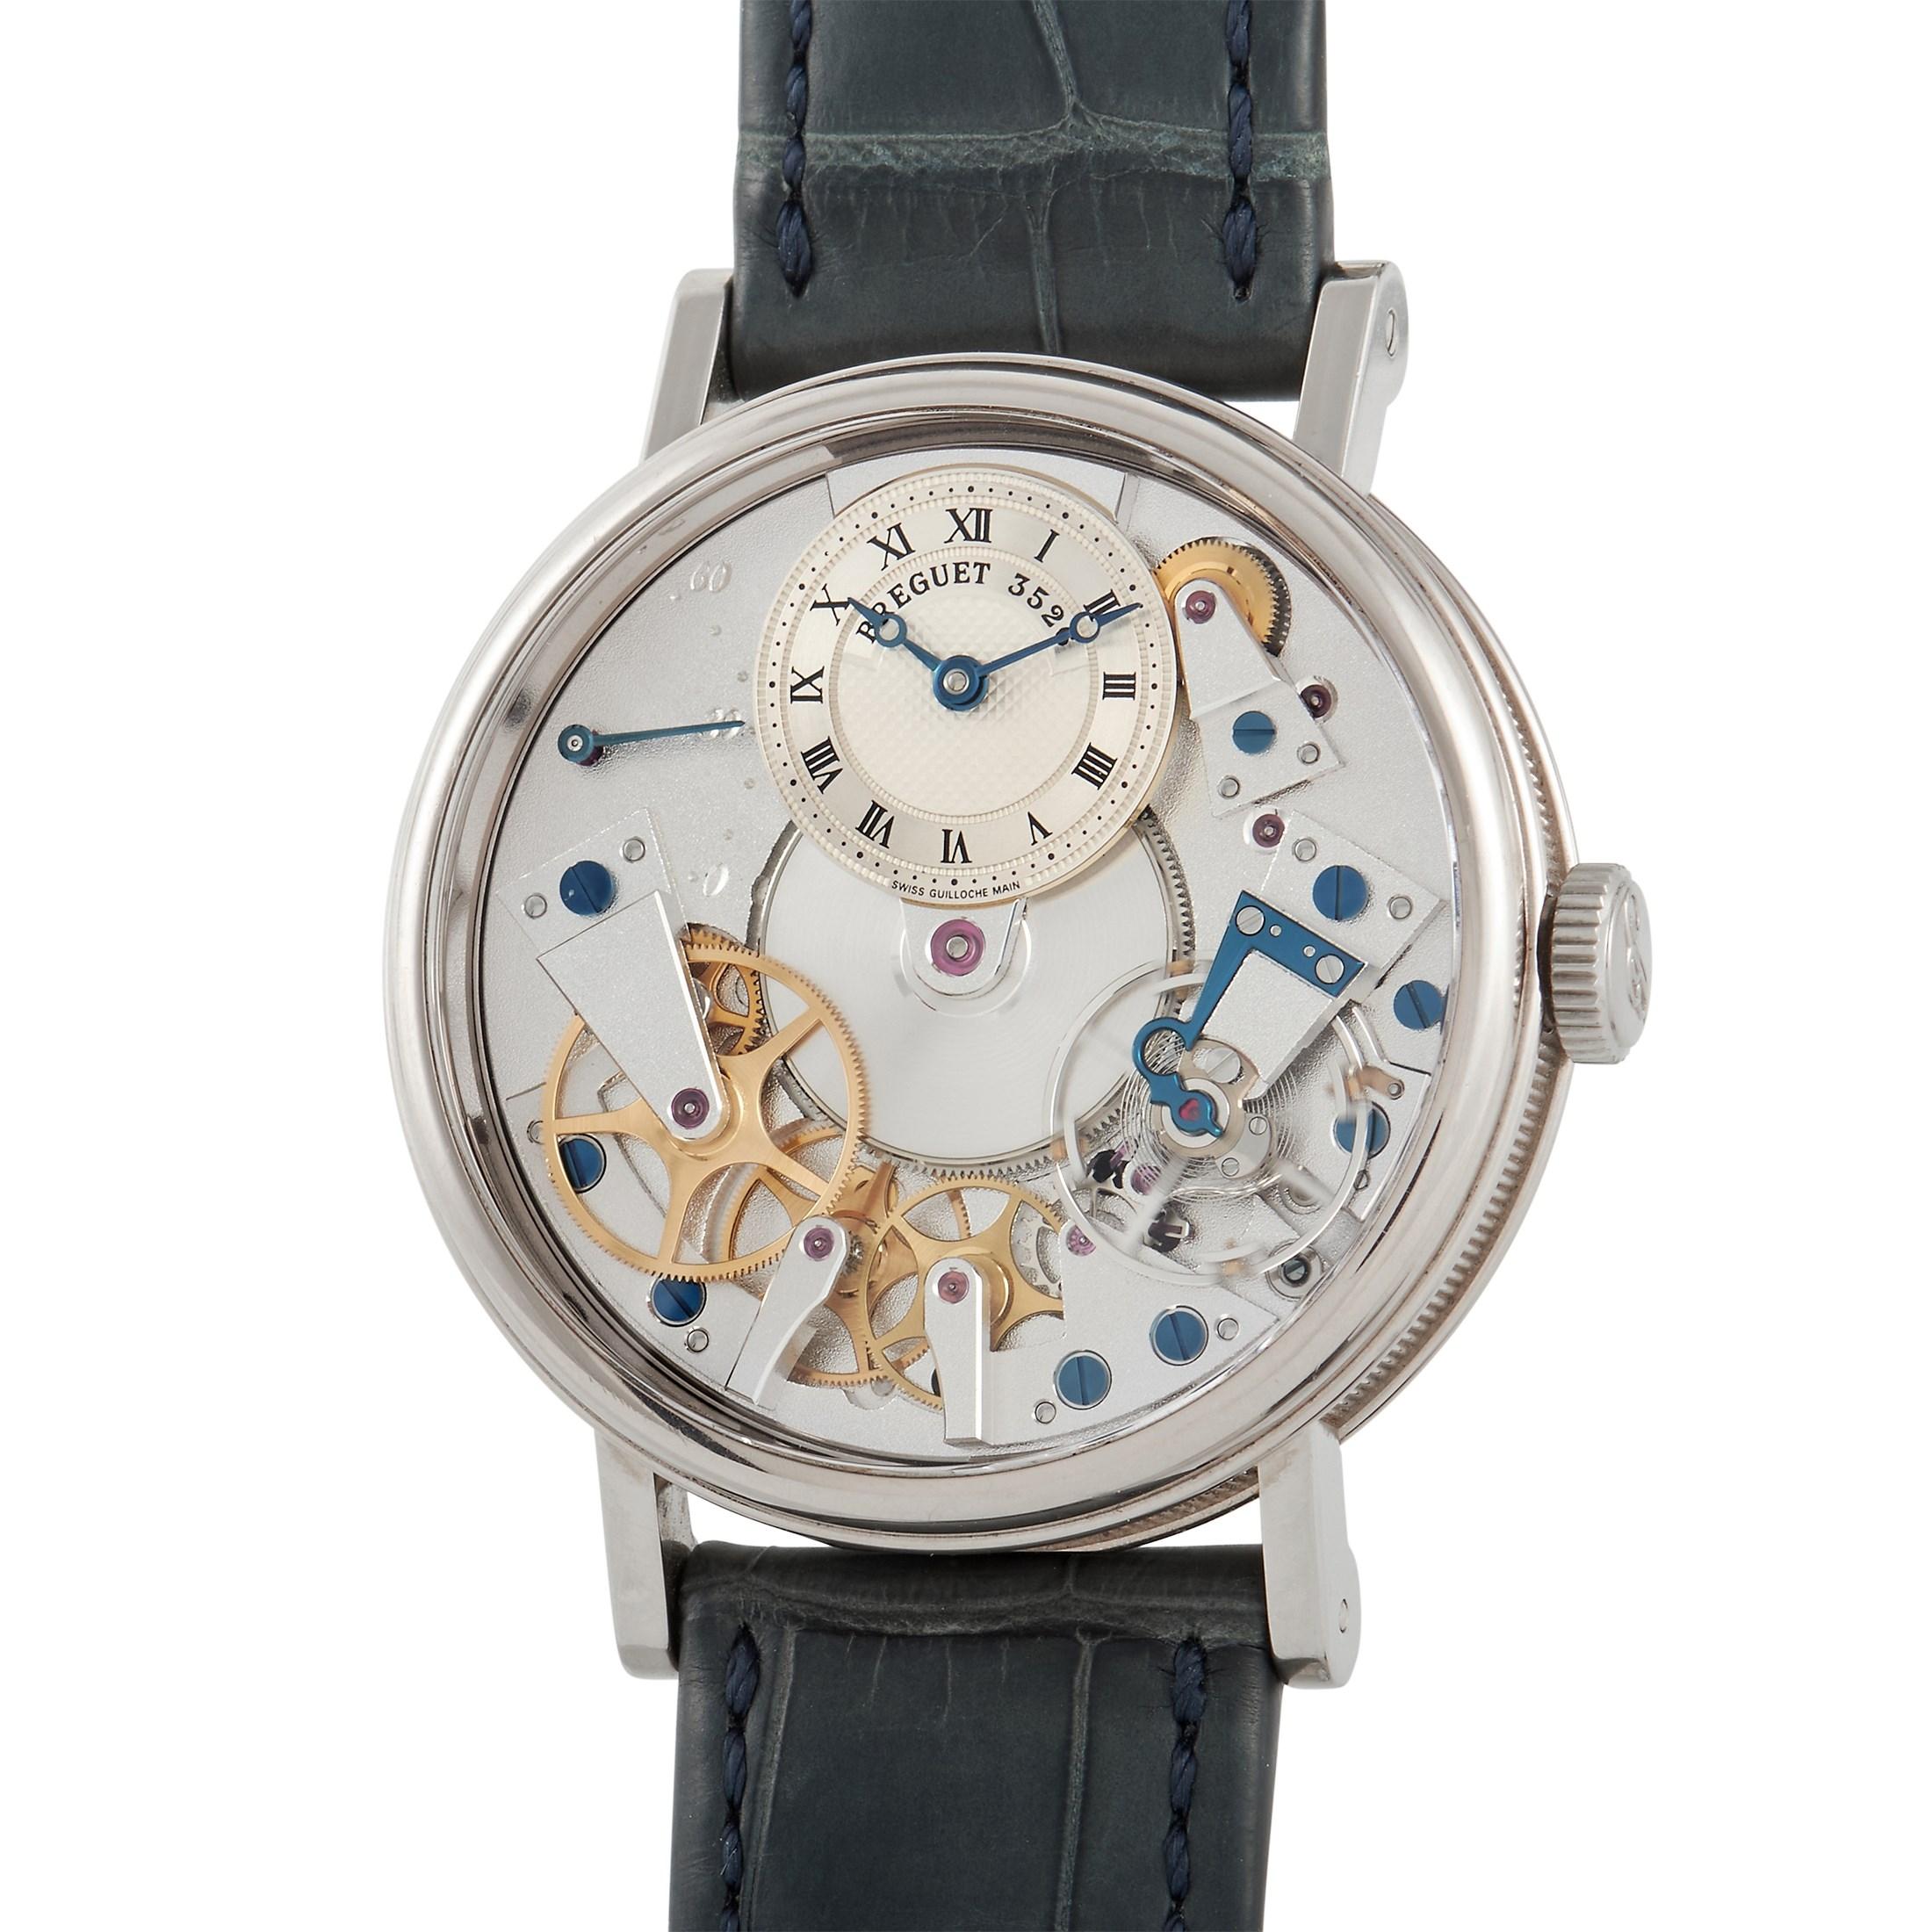 A timeless watch you'll love as much a decade from now as you do today. This piece from Breguet has the actual dial staged at 12 o'clock displaying an impressive hand-engraved silver Guilloche. The rest of the dial displays the inner movement of the